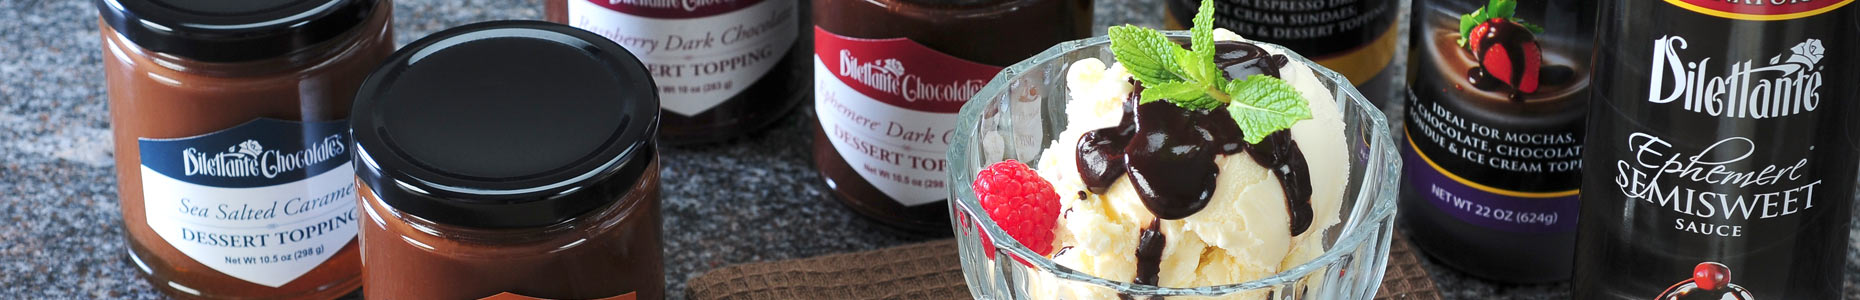 Decadent dessert sauces from Dilettante Mocha Café in chocolate and caramel varieties.